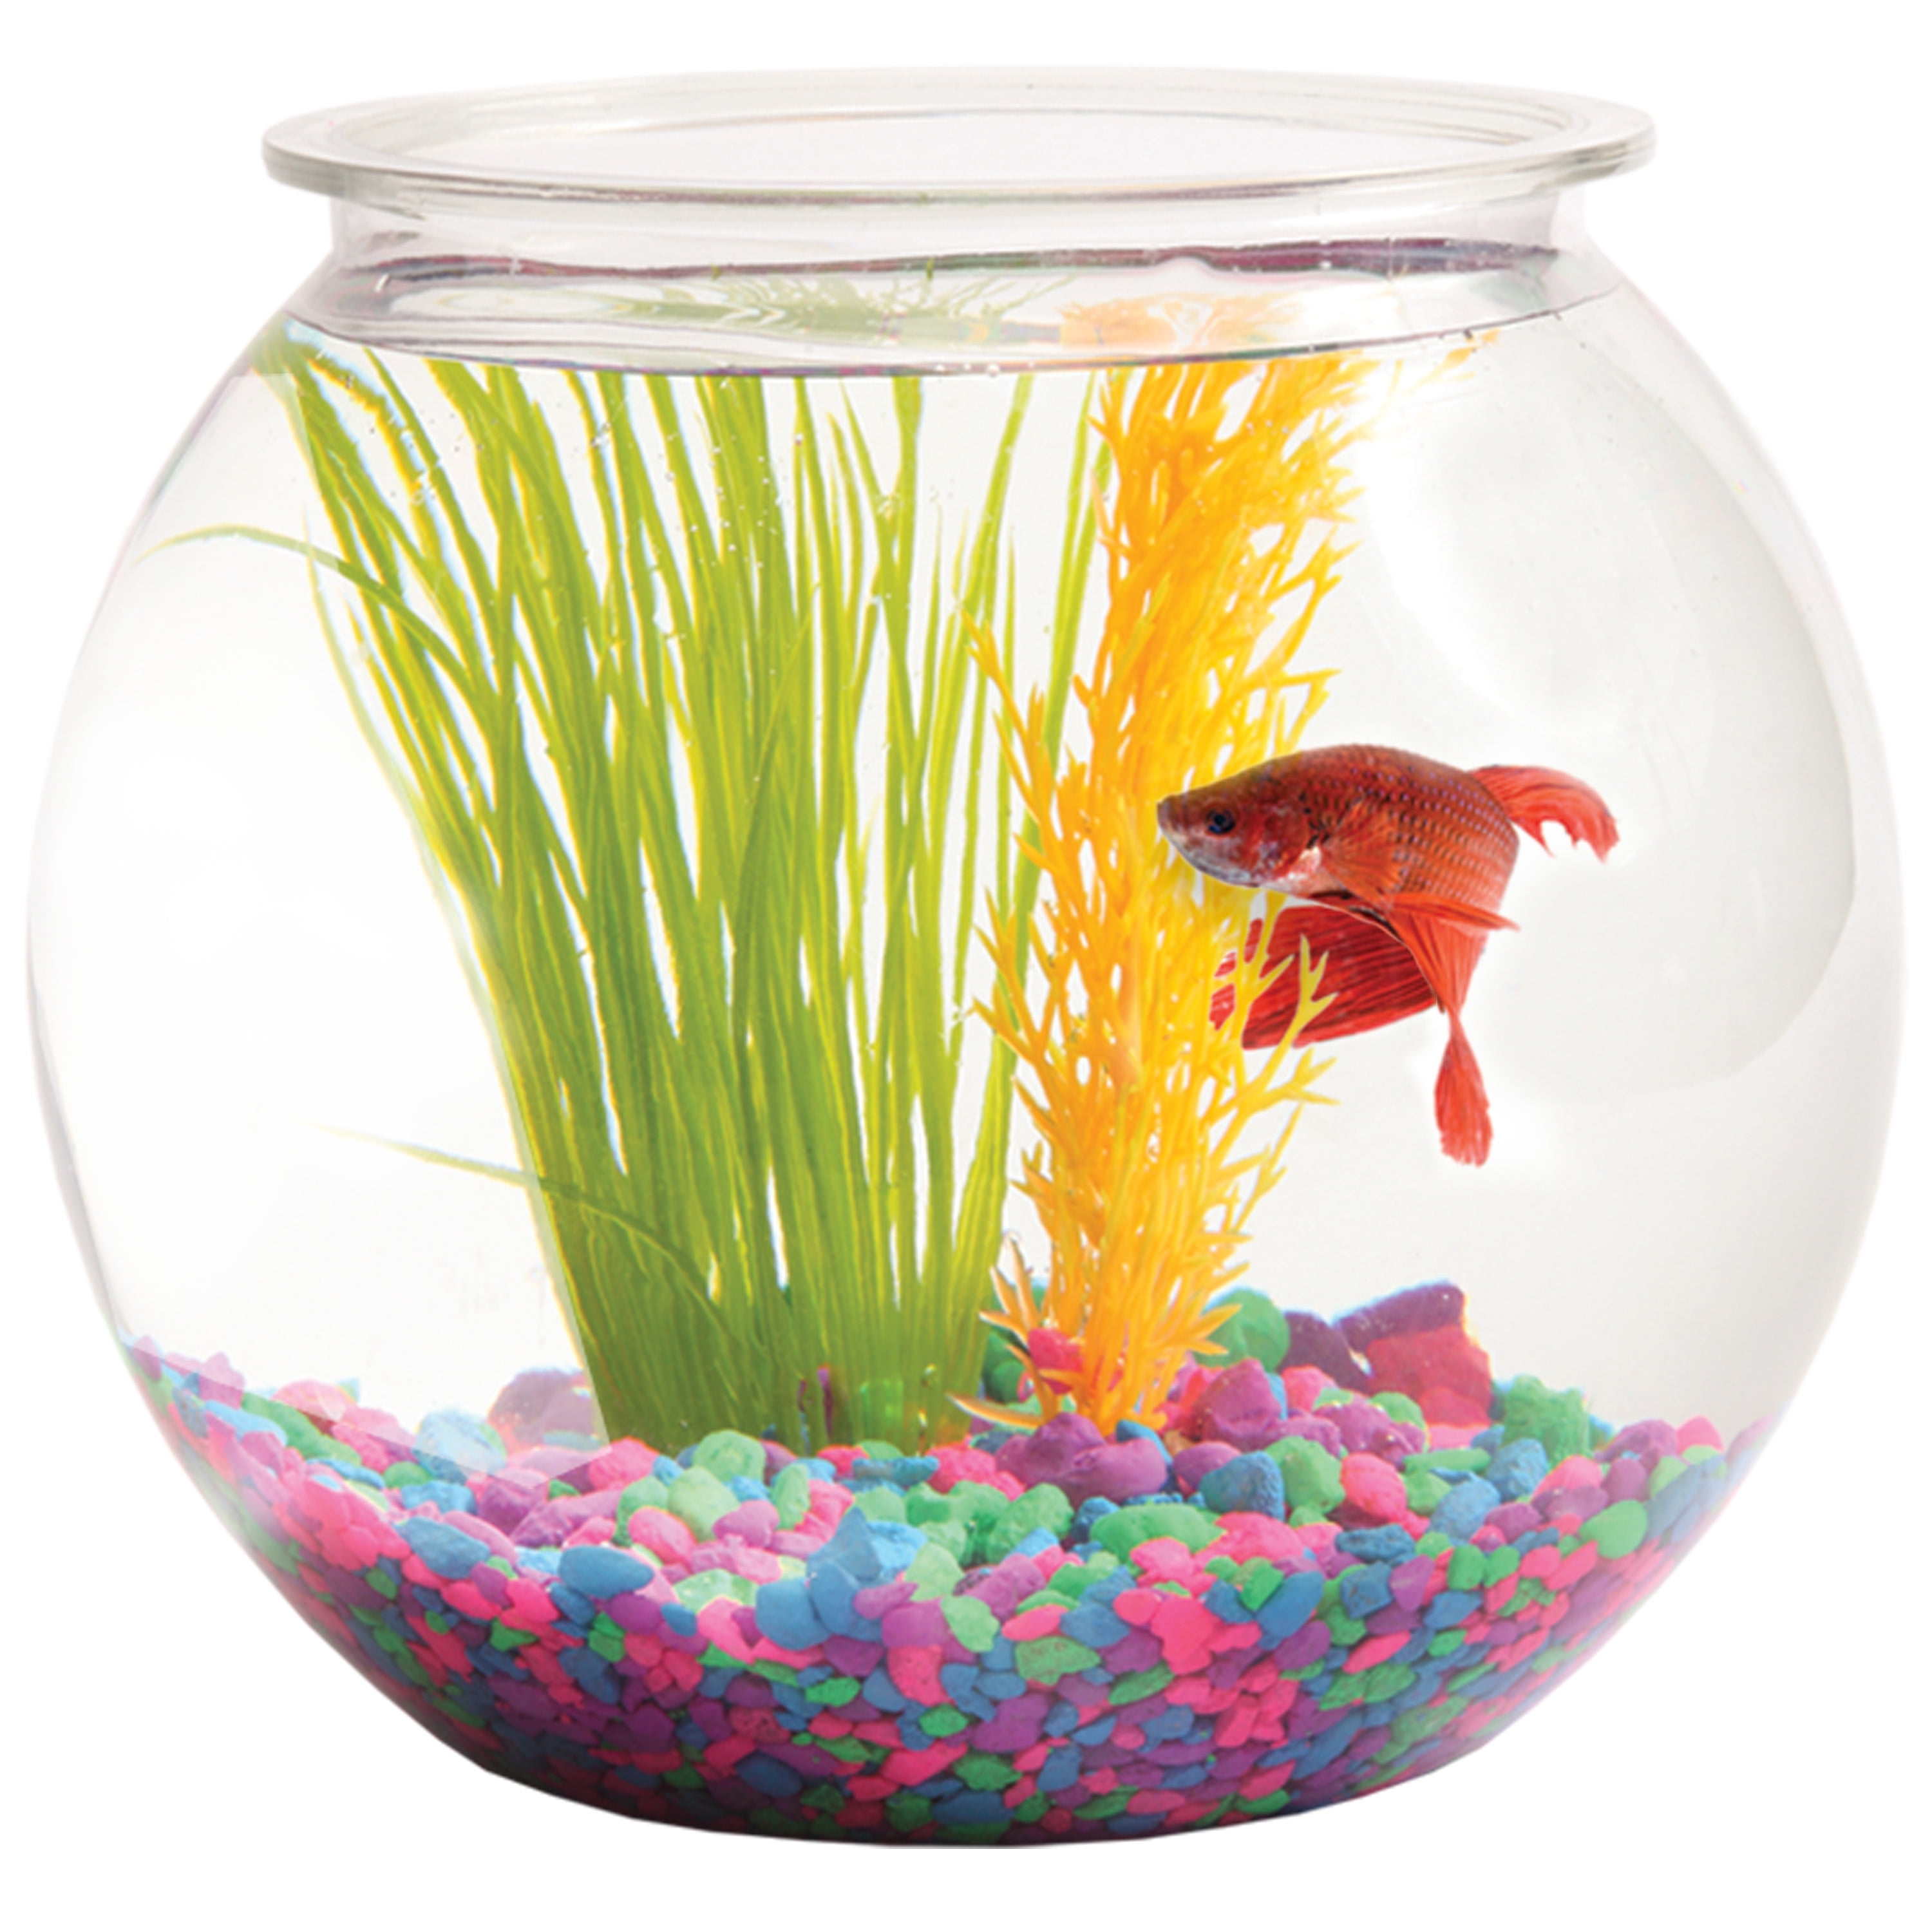 Aquatic Wonder Fish Bowl: Round Crystal Clear Plastic is Break-Resistant  and Light Weight. Ideal for Betta Fish Aquarium, Home décor and Party  Drinks